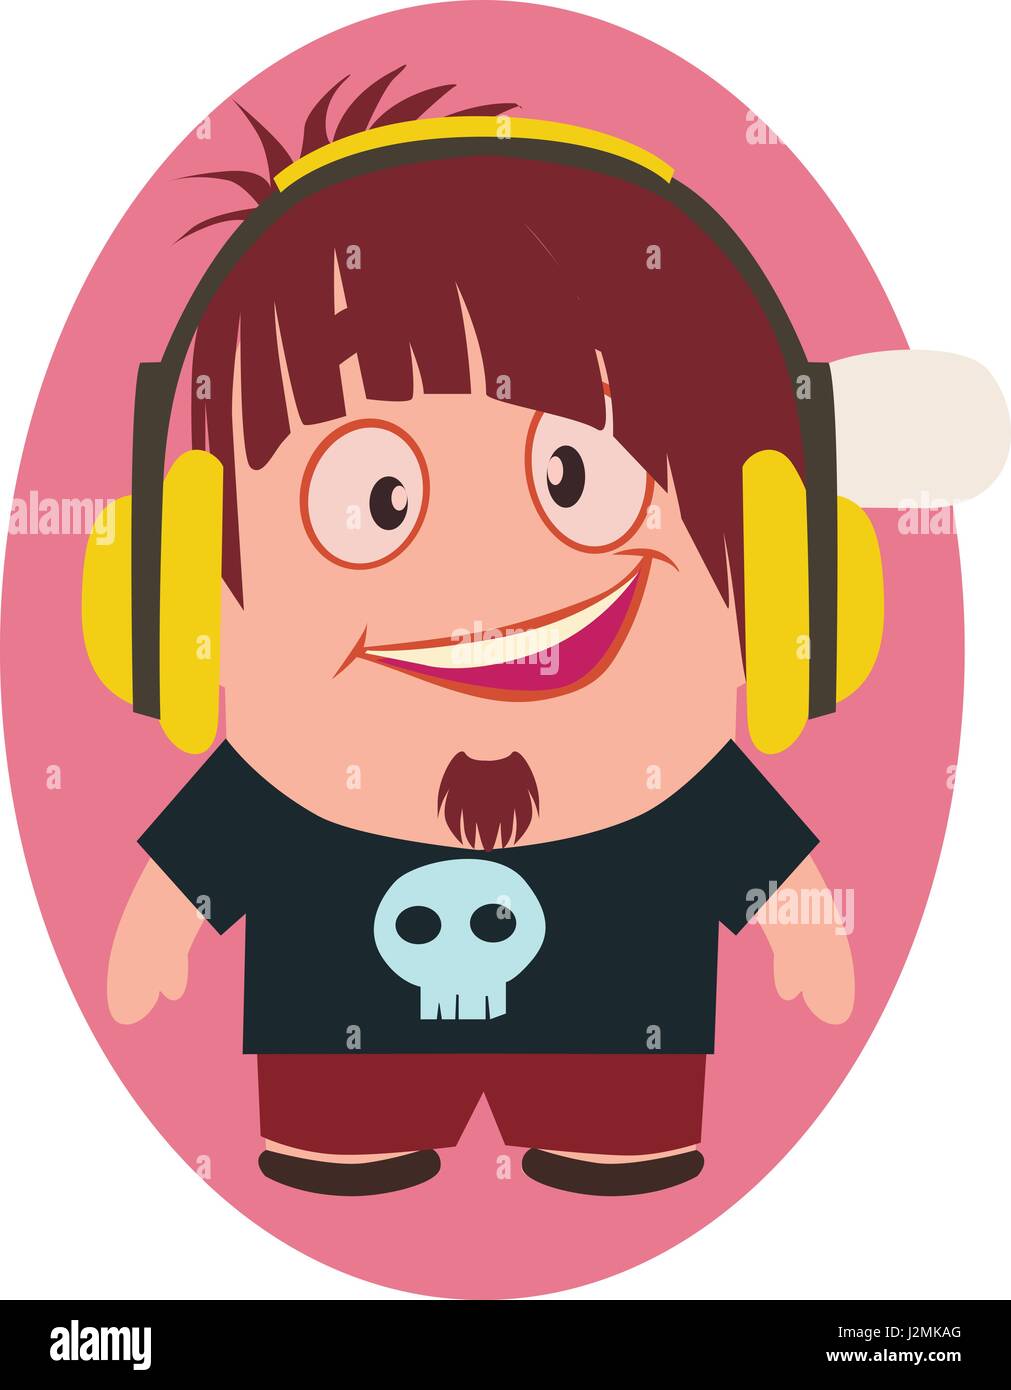 Cute, Cool and Funny Smiling Geek Avatar of Little Person with Headphones Cartoon Character in Flat Vector Stock Vector